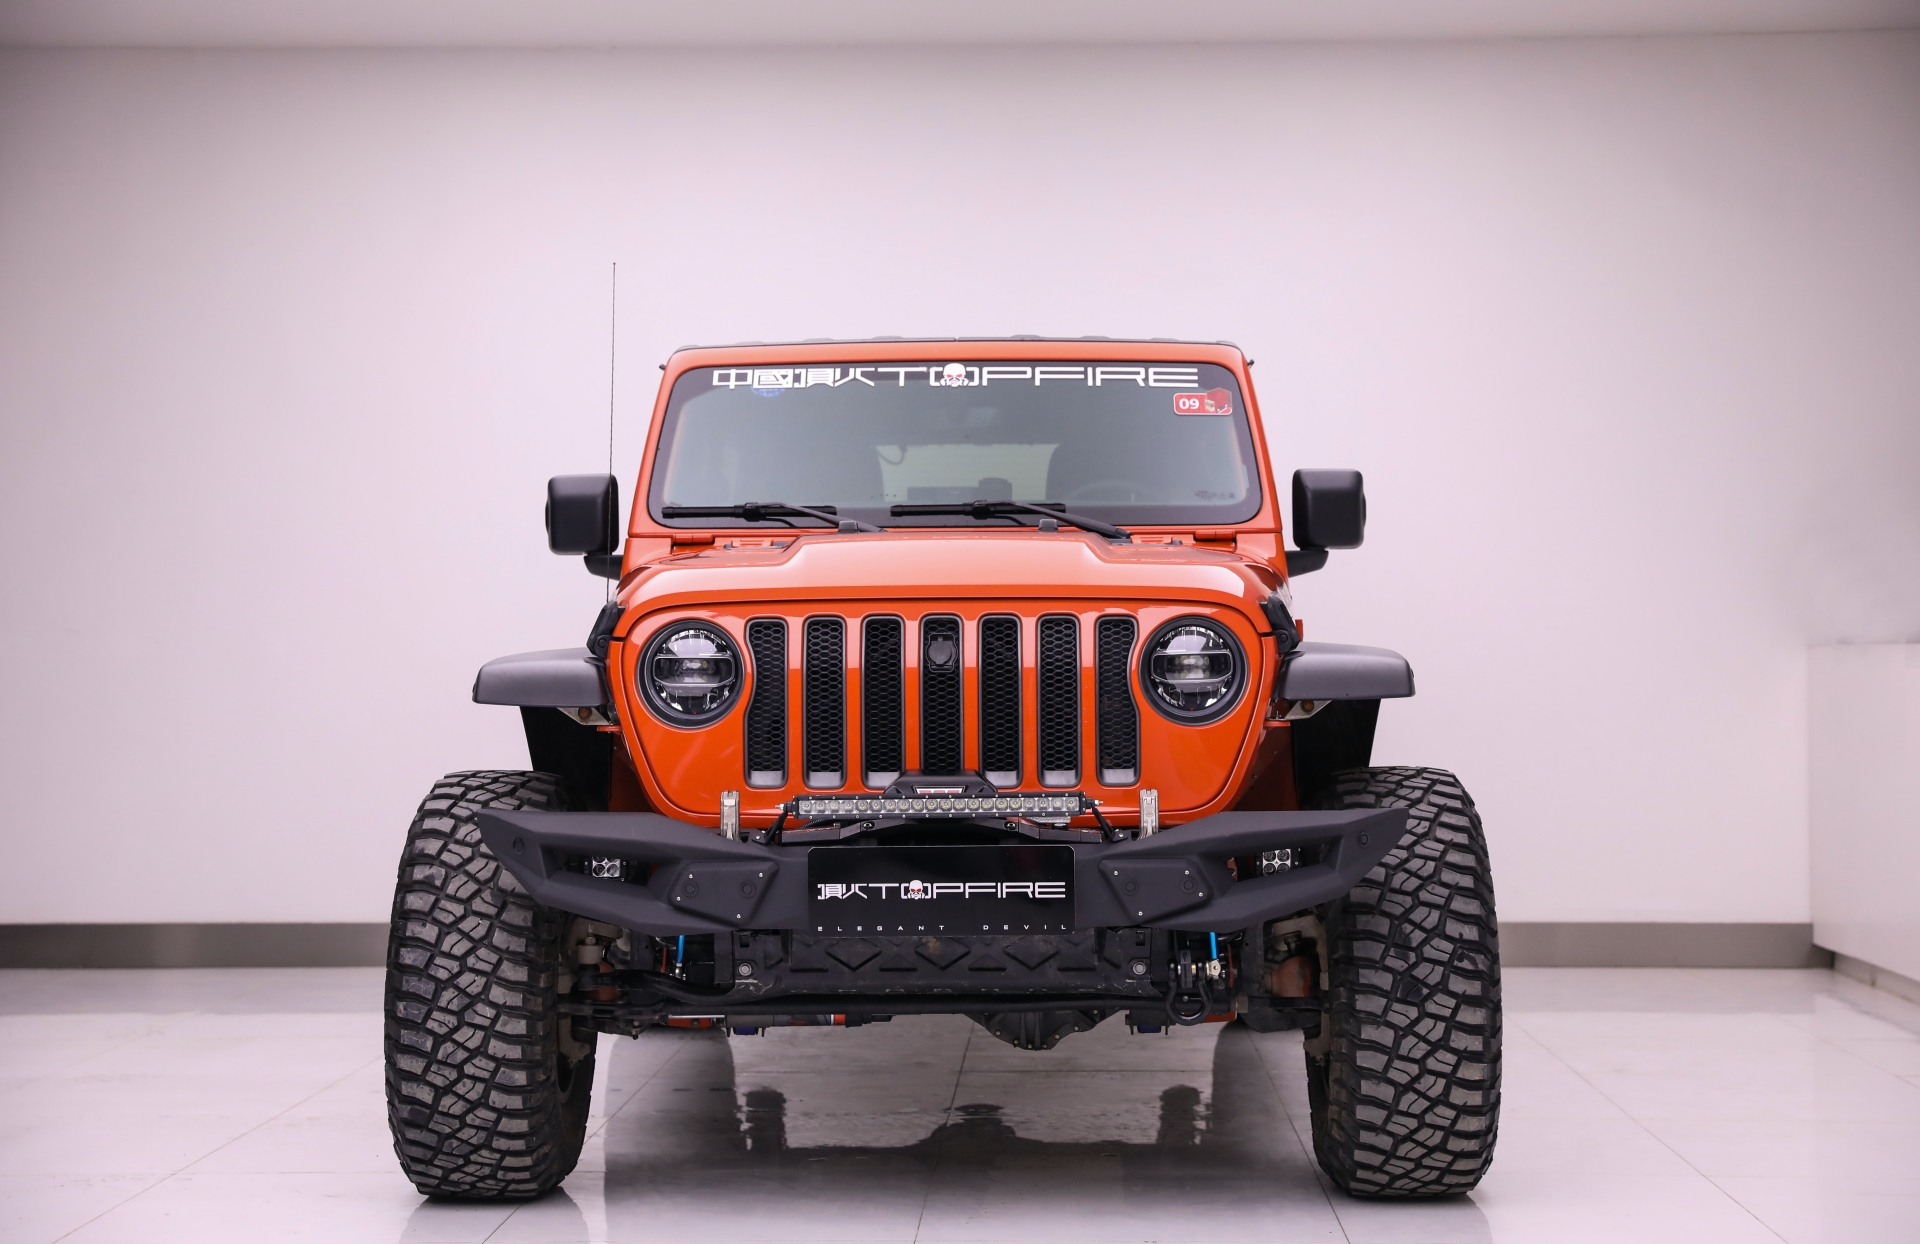 On Sale: Jeep Wrangler JL & JT TopFire Blade Style Stainless Steel Front  Full Width Bull Bar - Jeep Wrangler NEW JEEP JL PARTS - Jeep Wrangler  Offroad Accessories & Parts in Brisbane